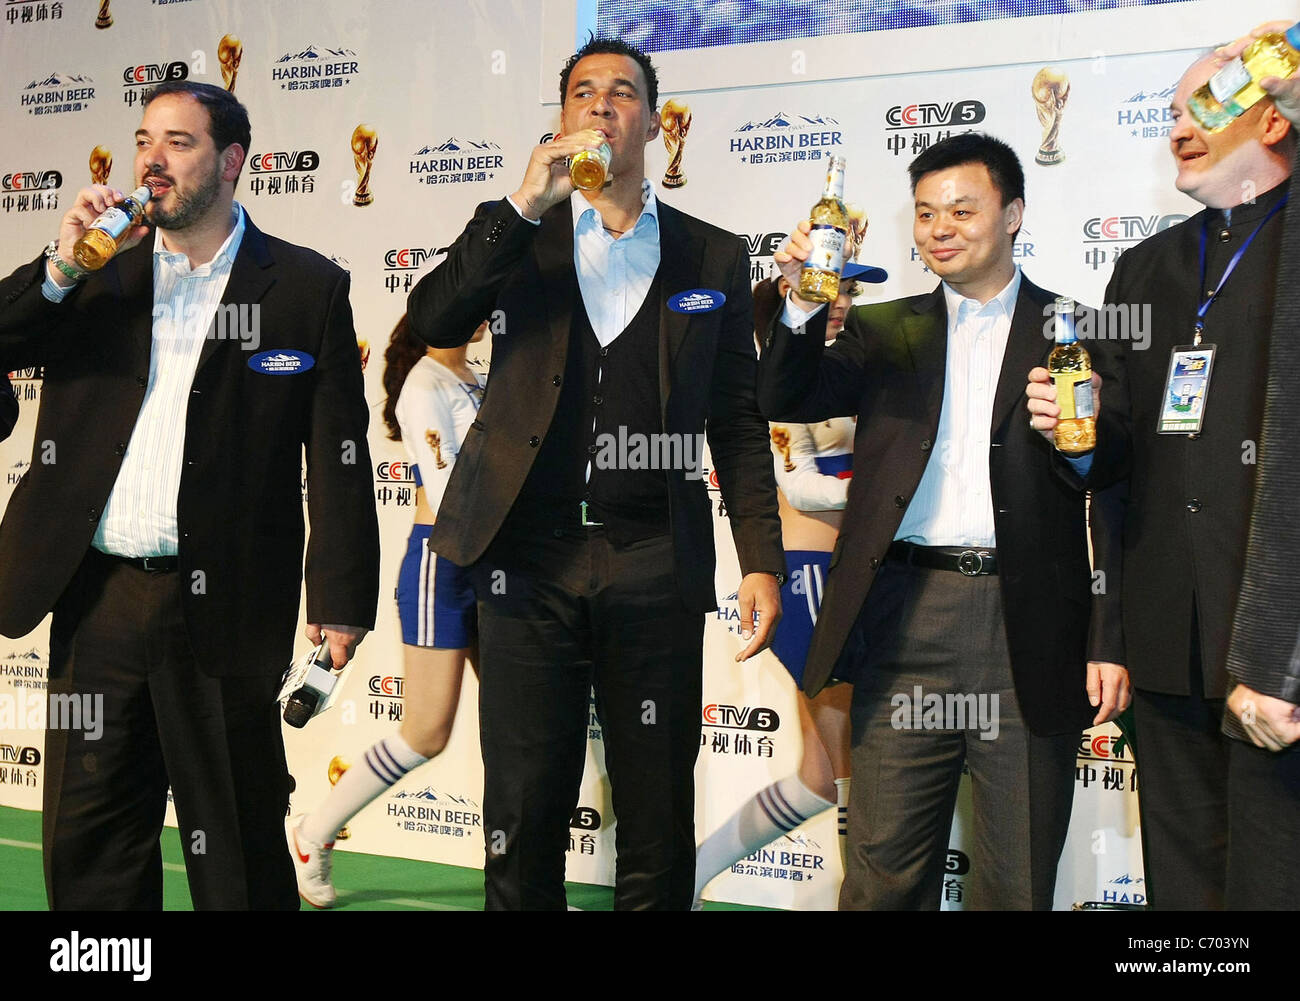 DUTCH COURAGE Holland's former soccer hero Ruud Gullit is toasting the upcoming World Cup with the event's official beer. The Stock Photo